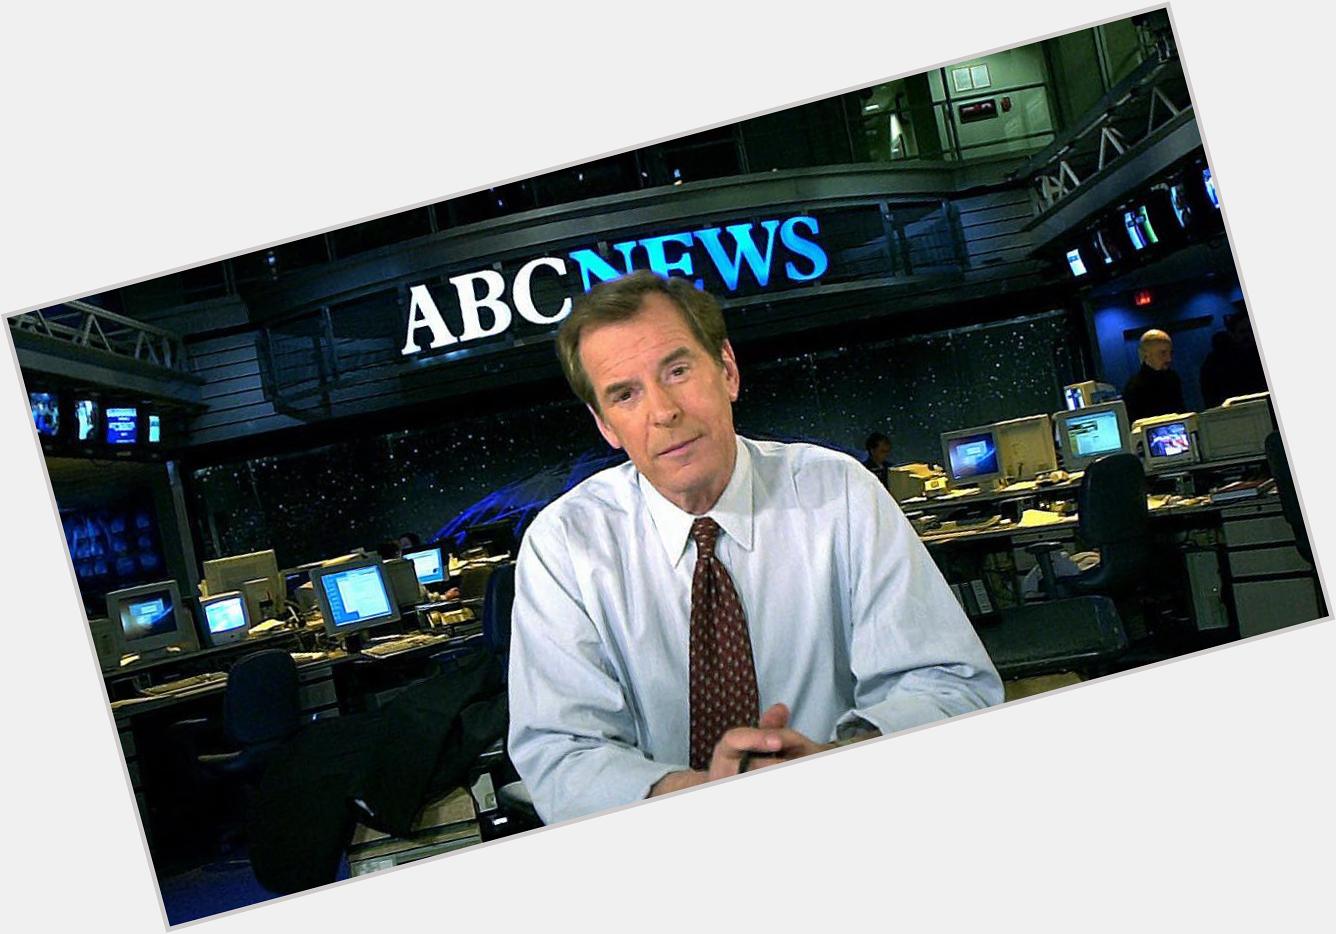 Happy Birthday to Peter Jennings, who would have turned 79 today! 